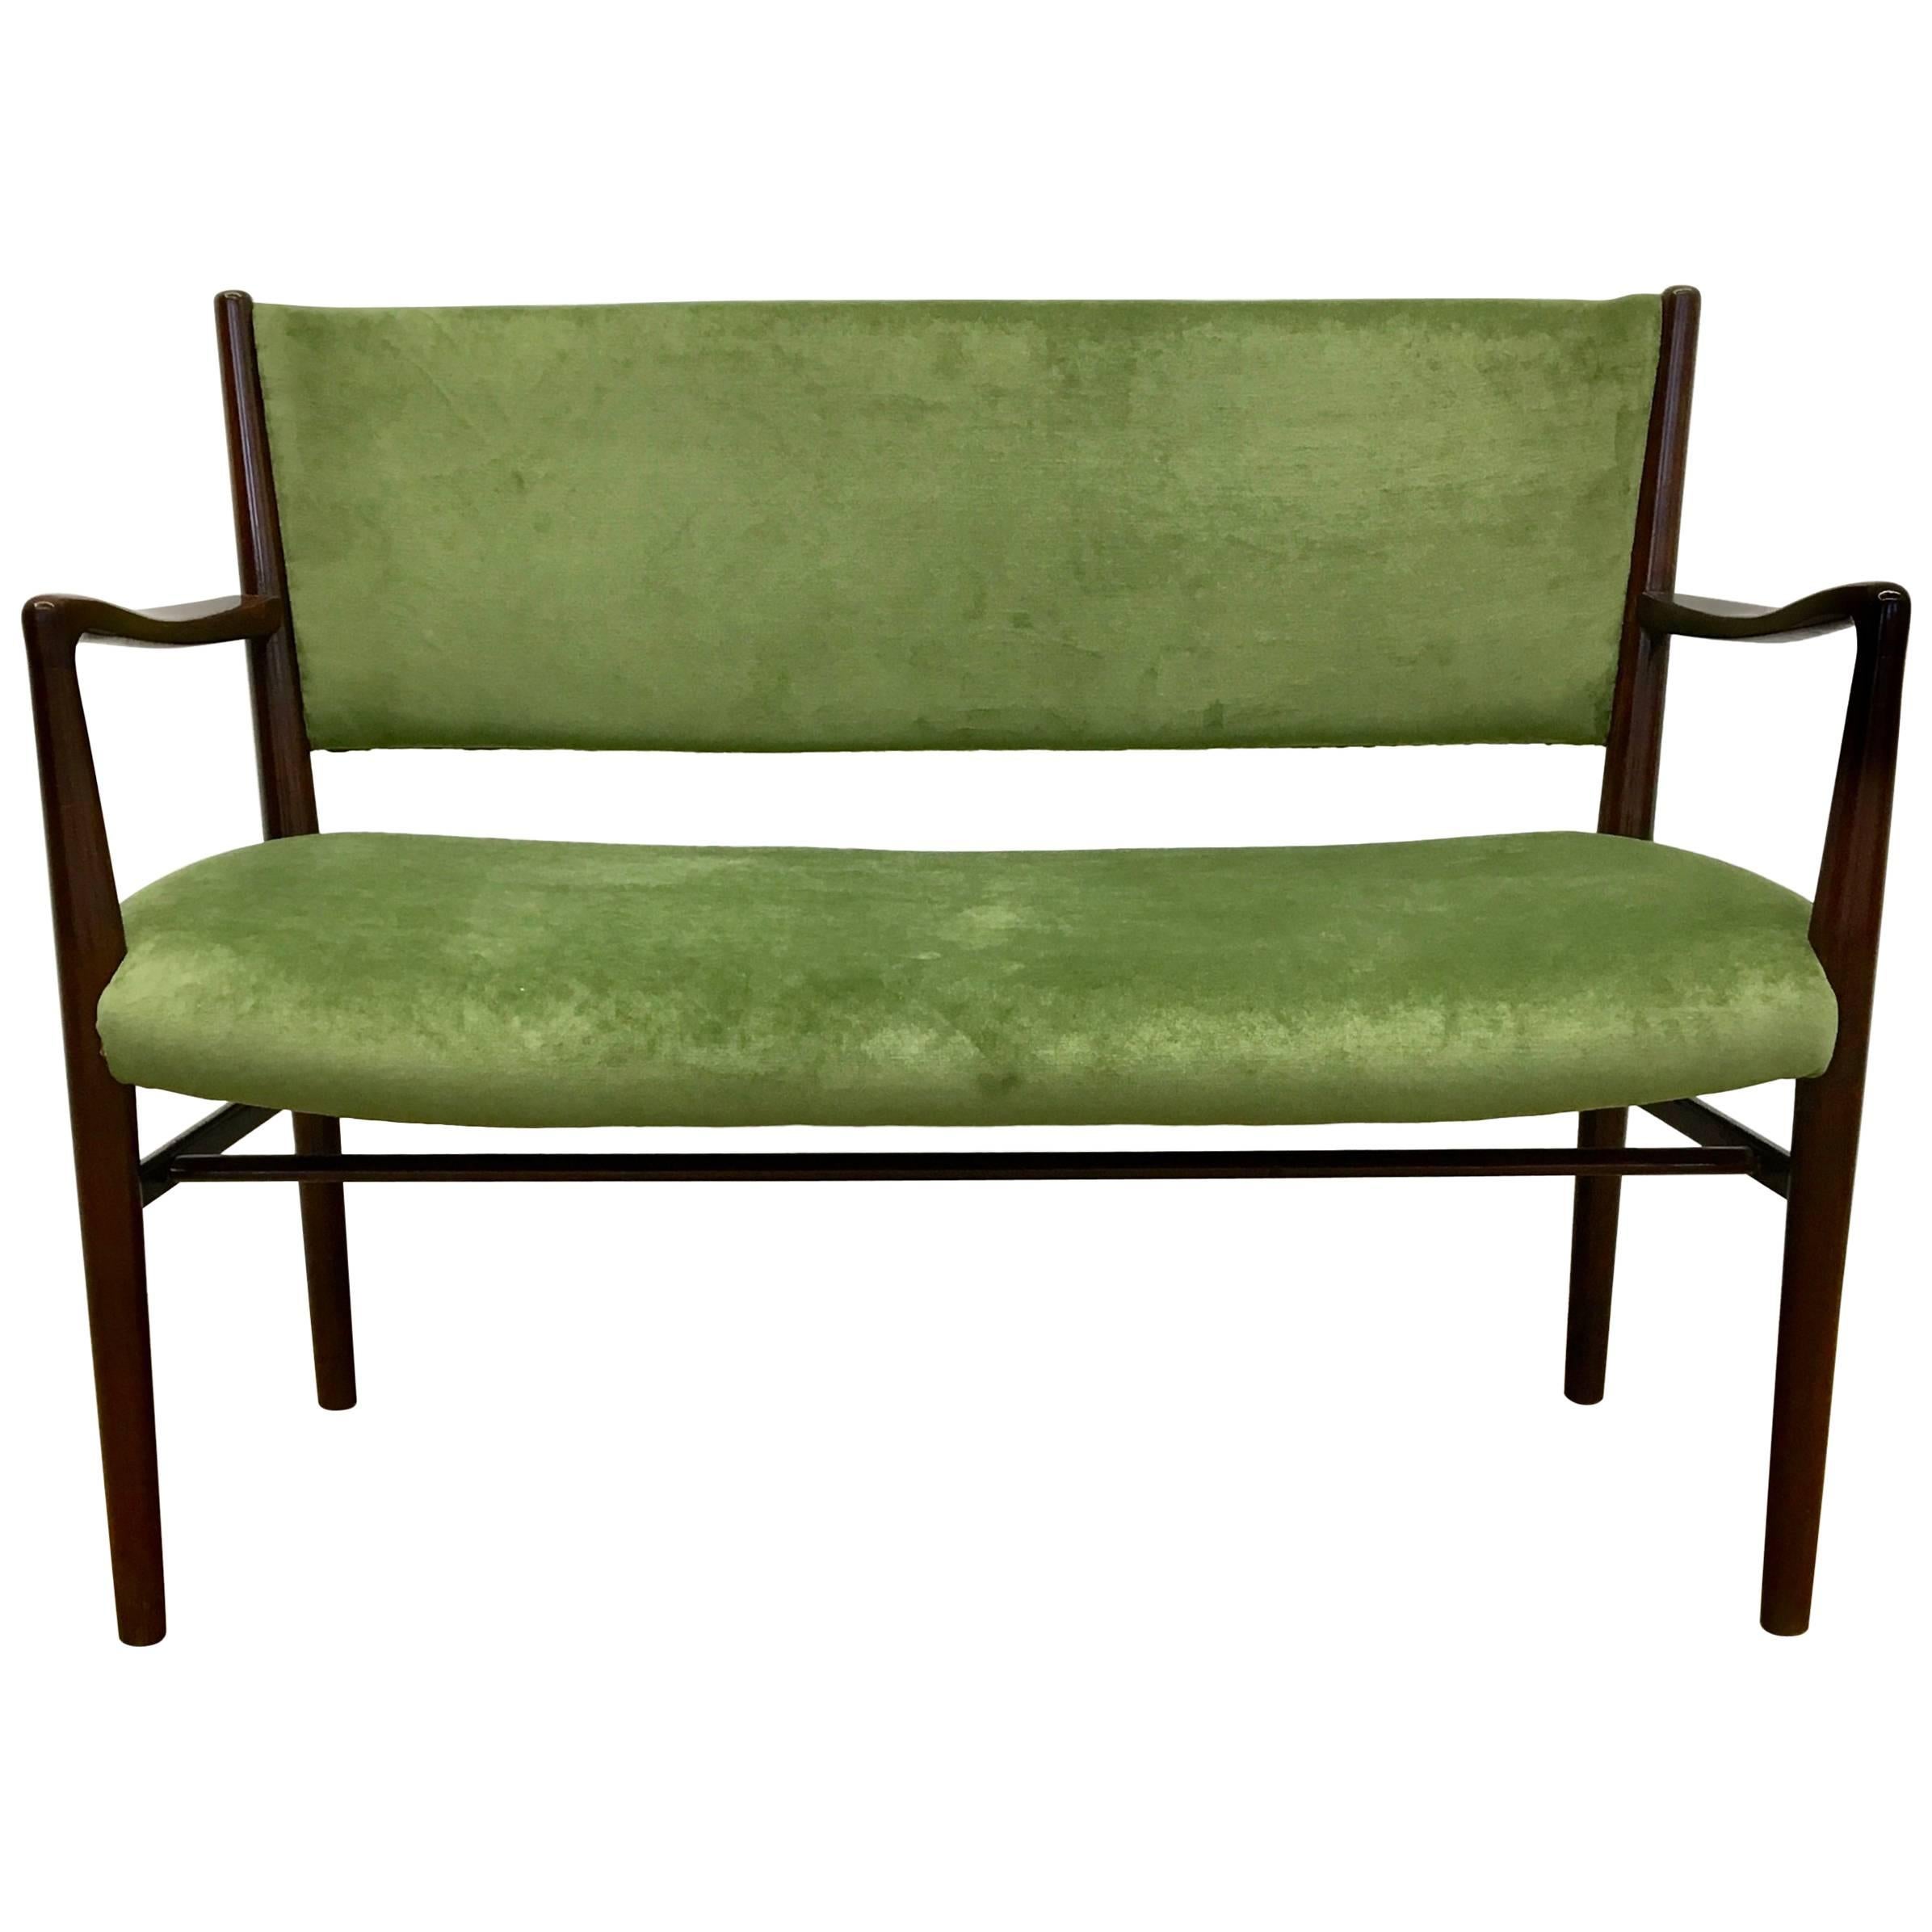 Reupholstered Green Midcentury Two-Seater Bench, 1950s